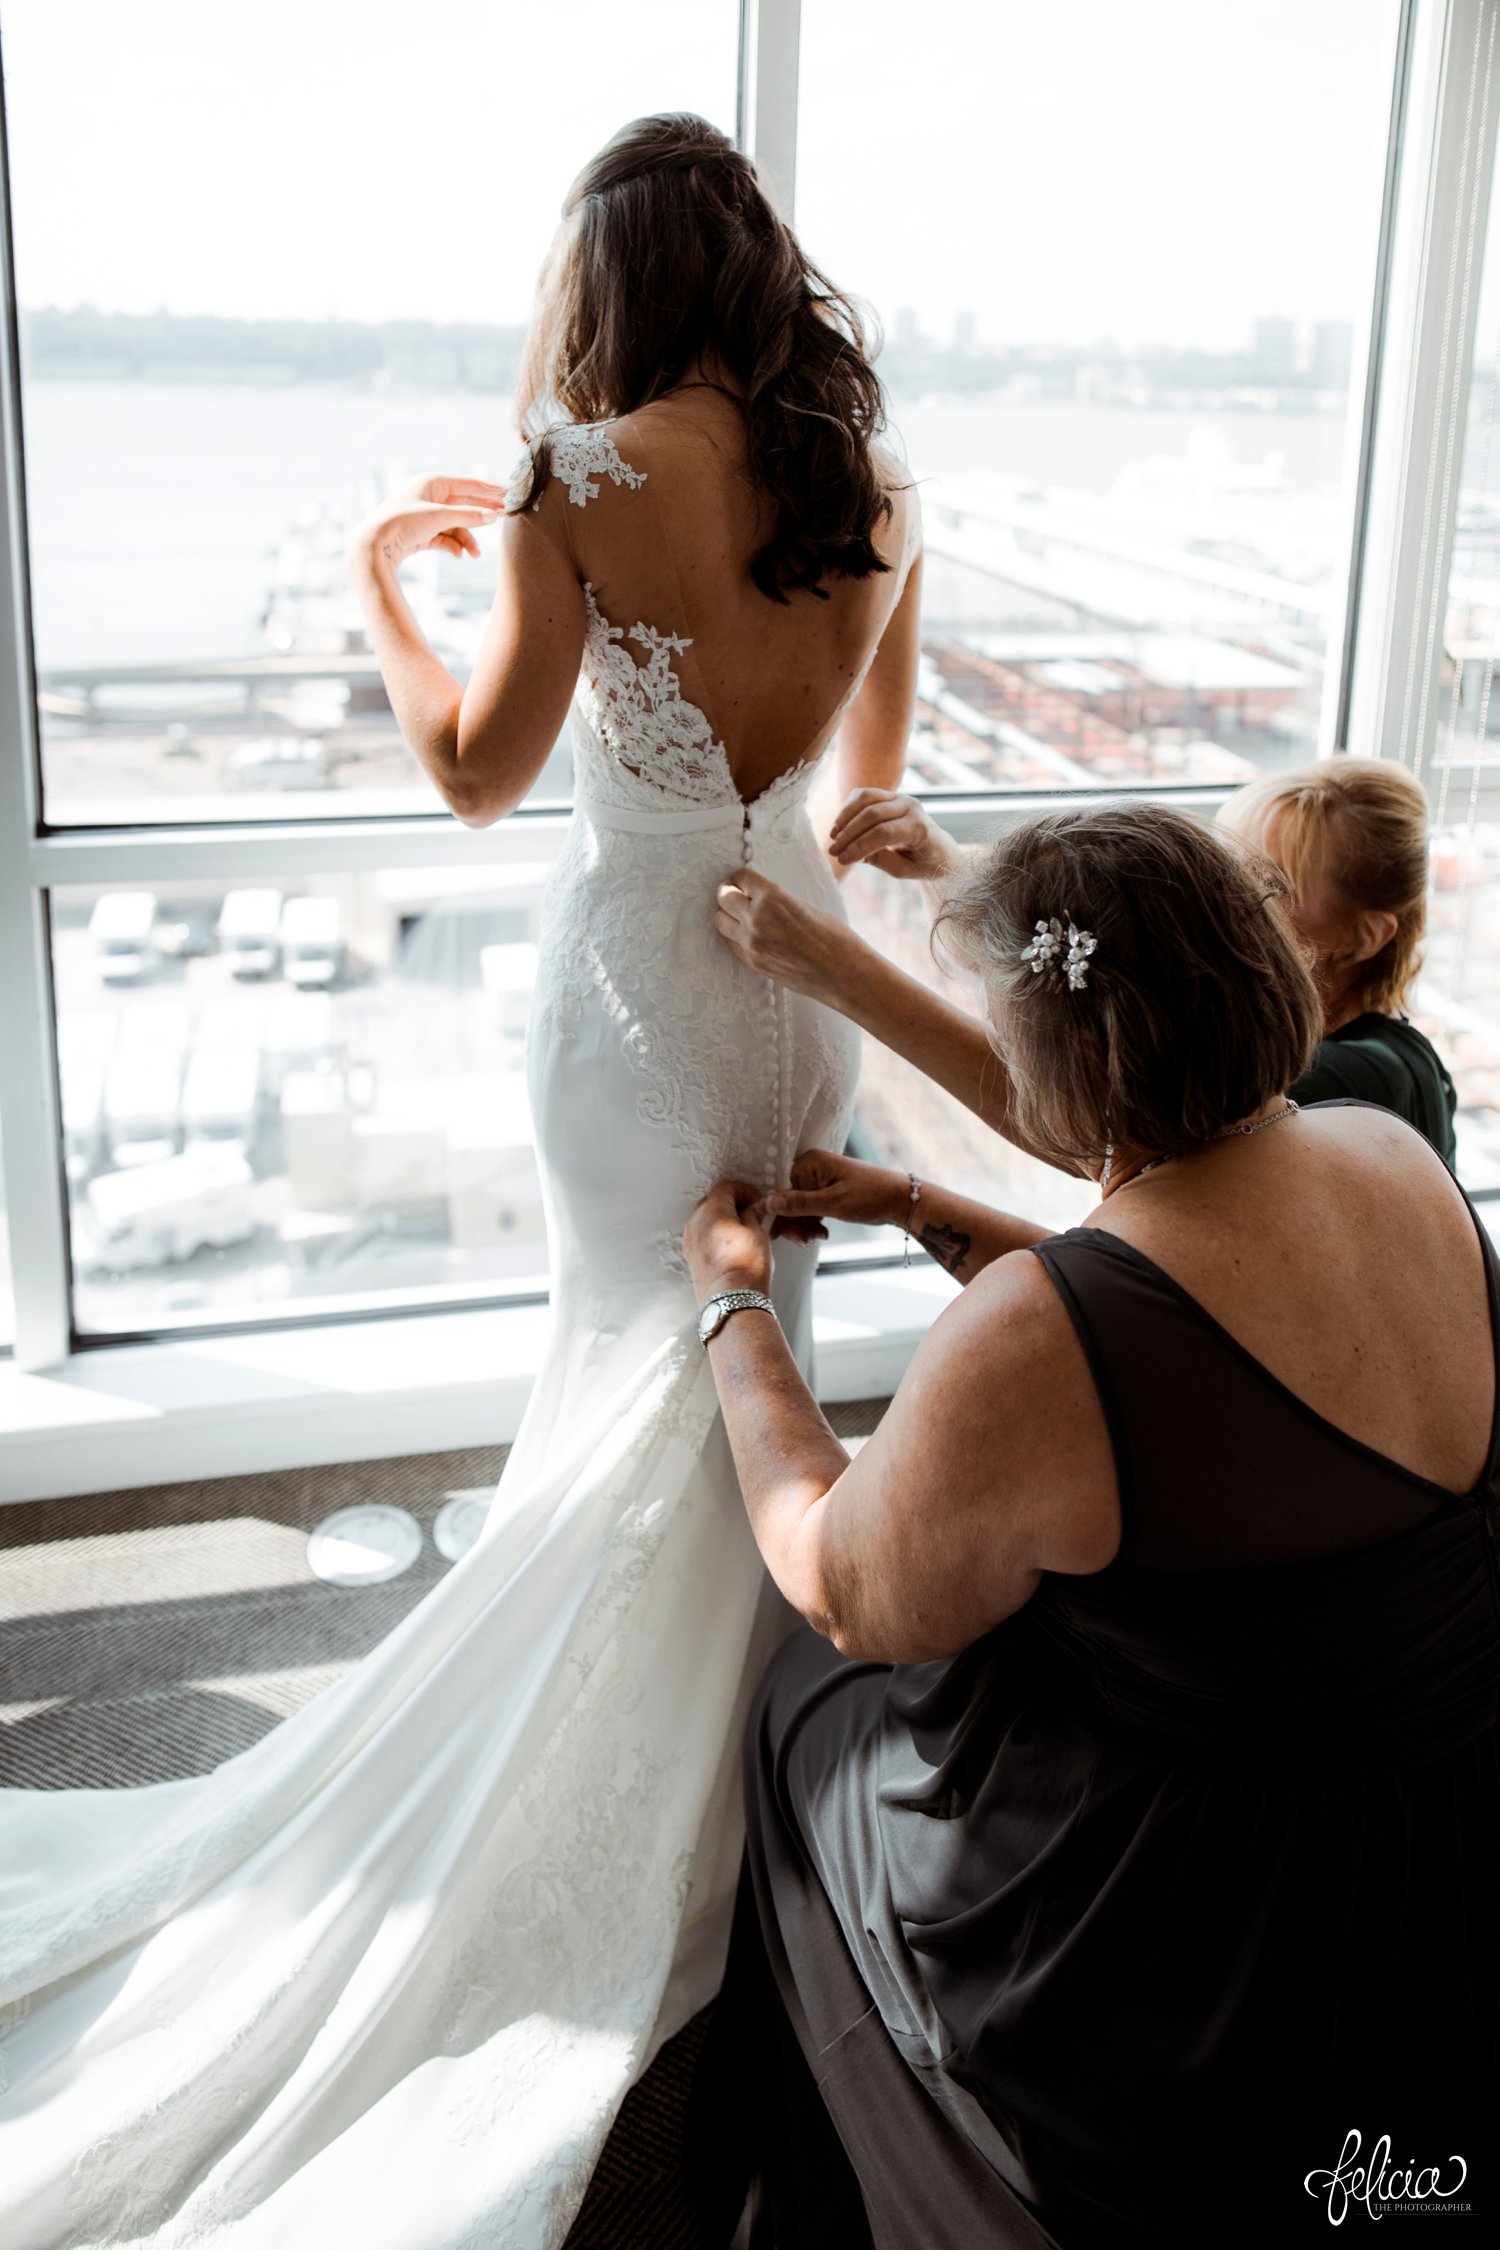 images by feliciathephotographer.com | destination wedding photographer | new york city | details | classic | shoes | pre ceremony | getting ready | kimpton ink48 hotel | putting on the dress | mother of the bride | white robe | lace detail | open back | nordstrom | pronovias | 